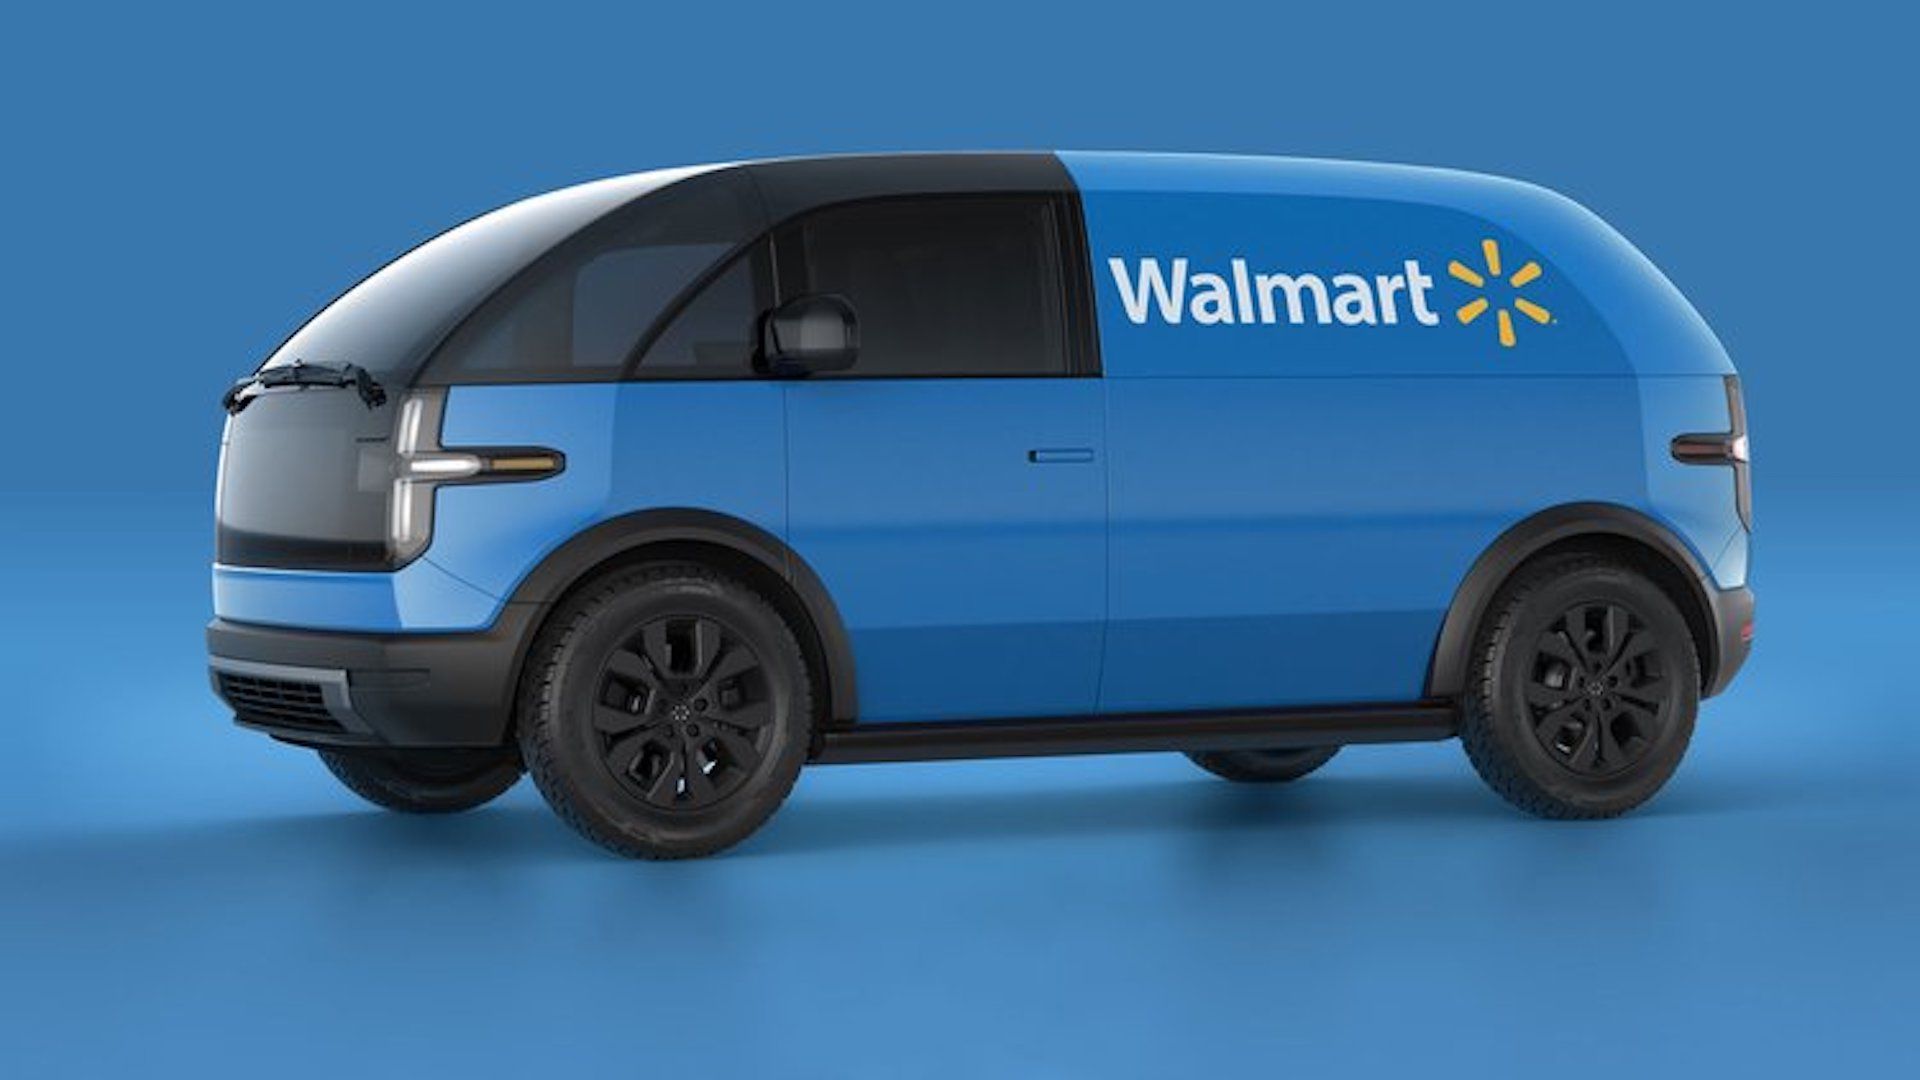 Photo of a Canoo electric van with the Walmart logo